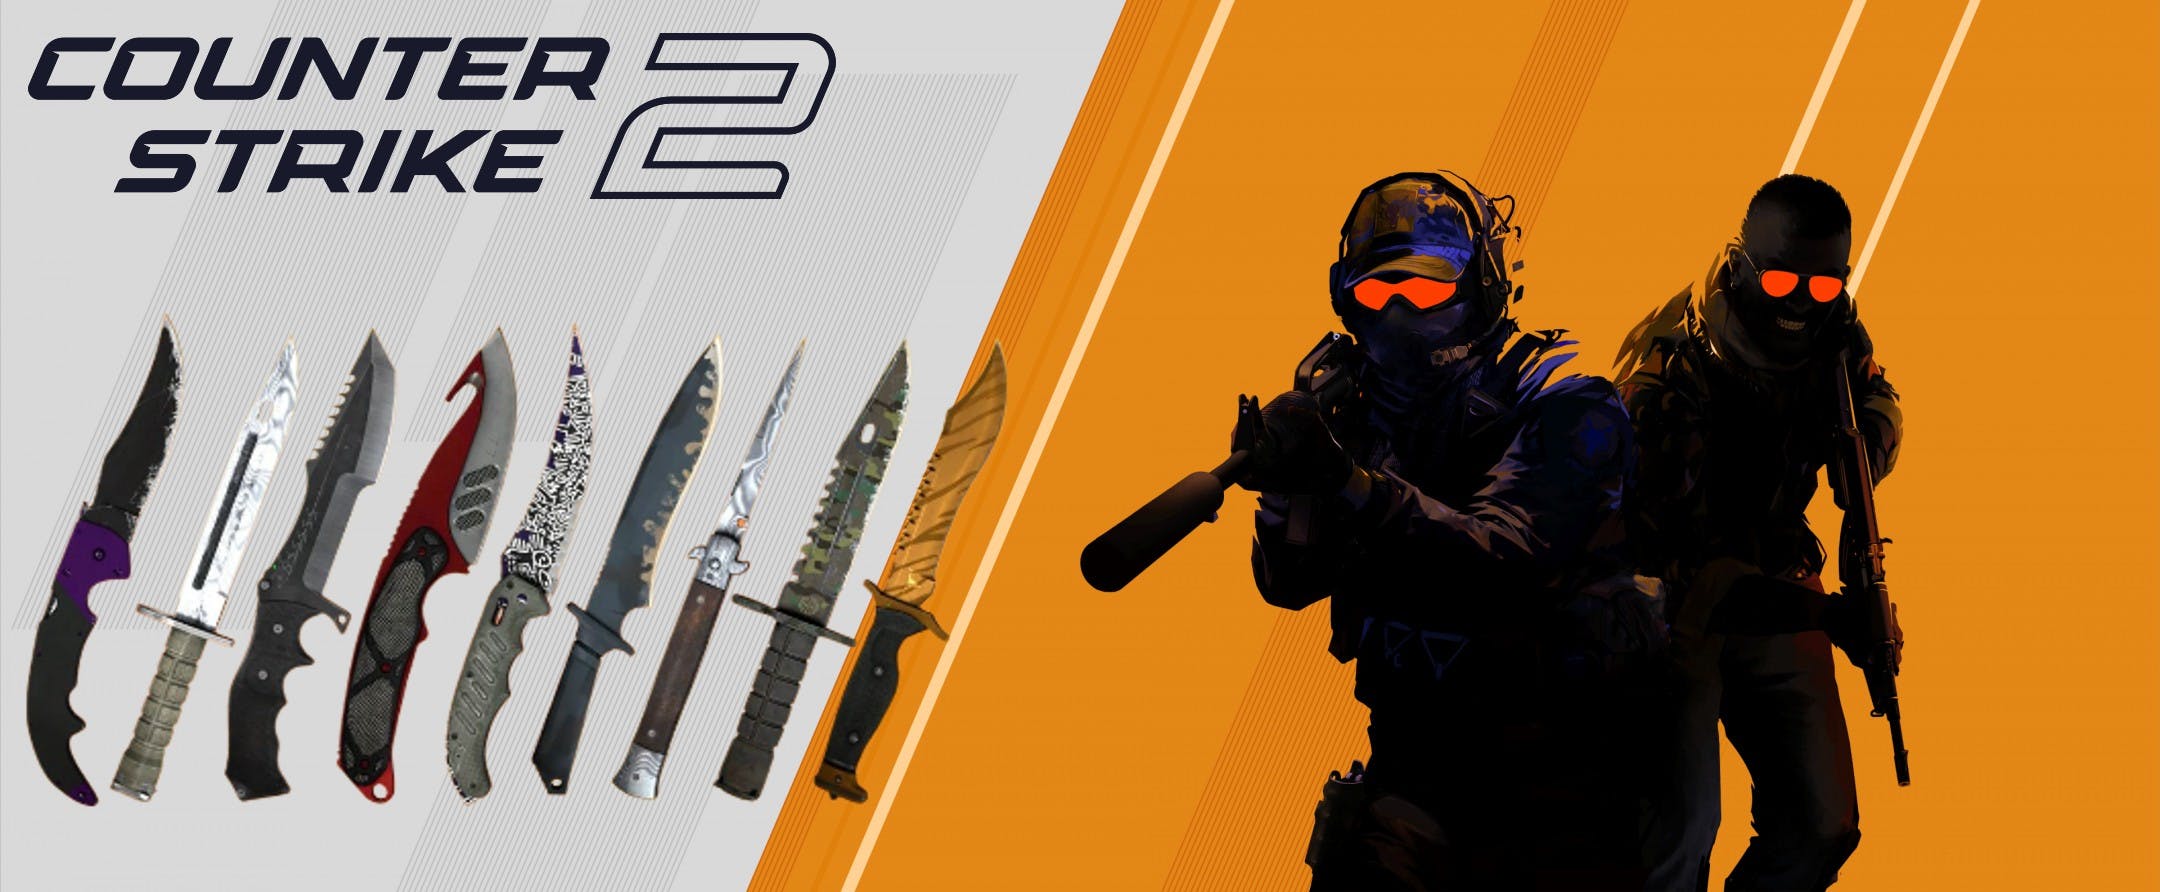 Knives are super rare in CS2 cases, with a 0.26% chance to get one. 